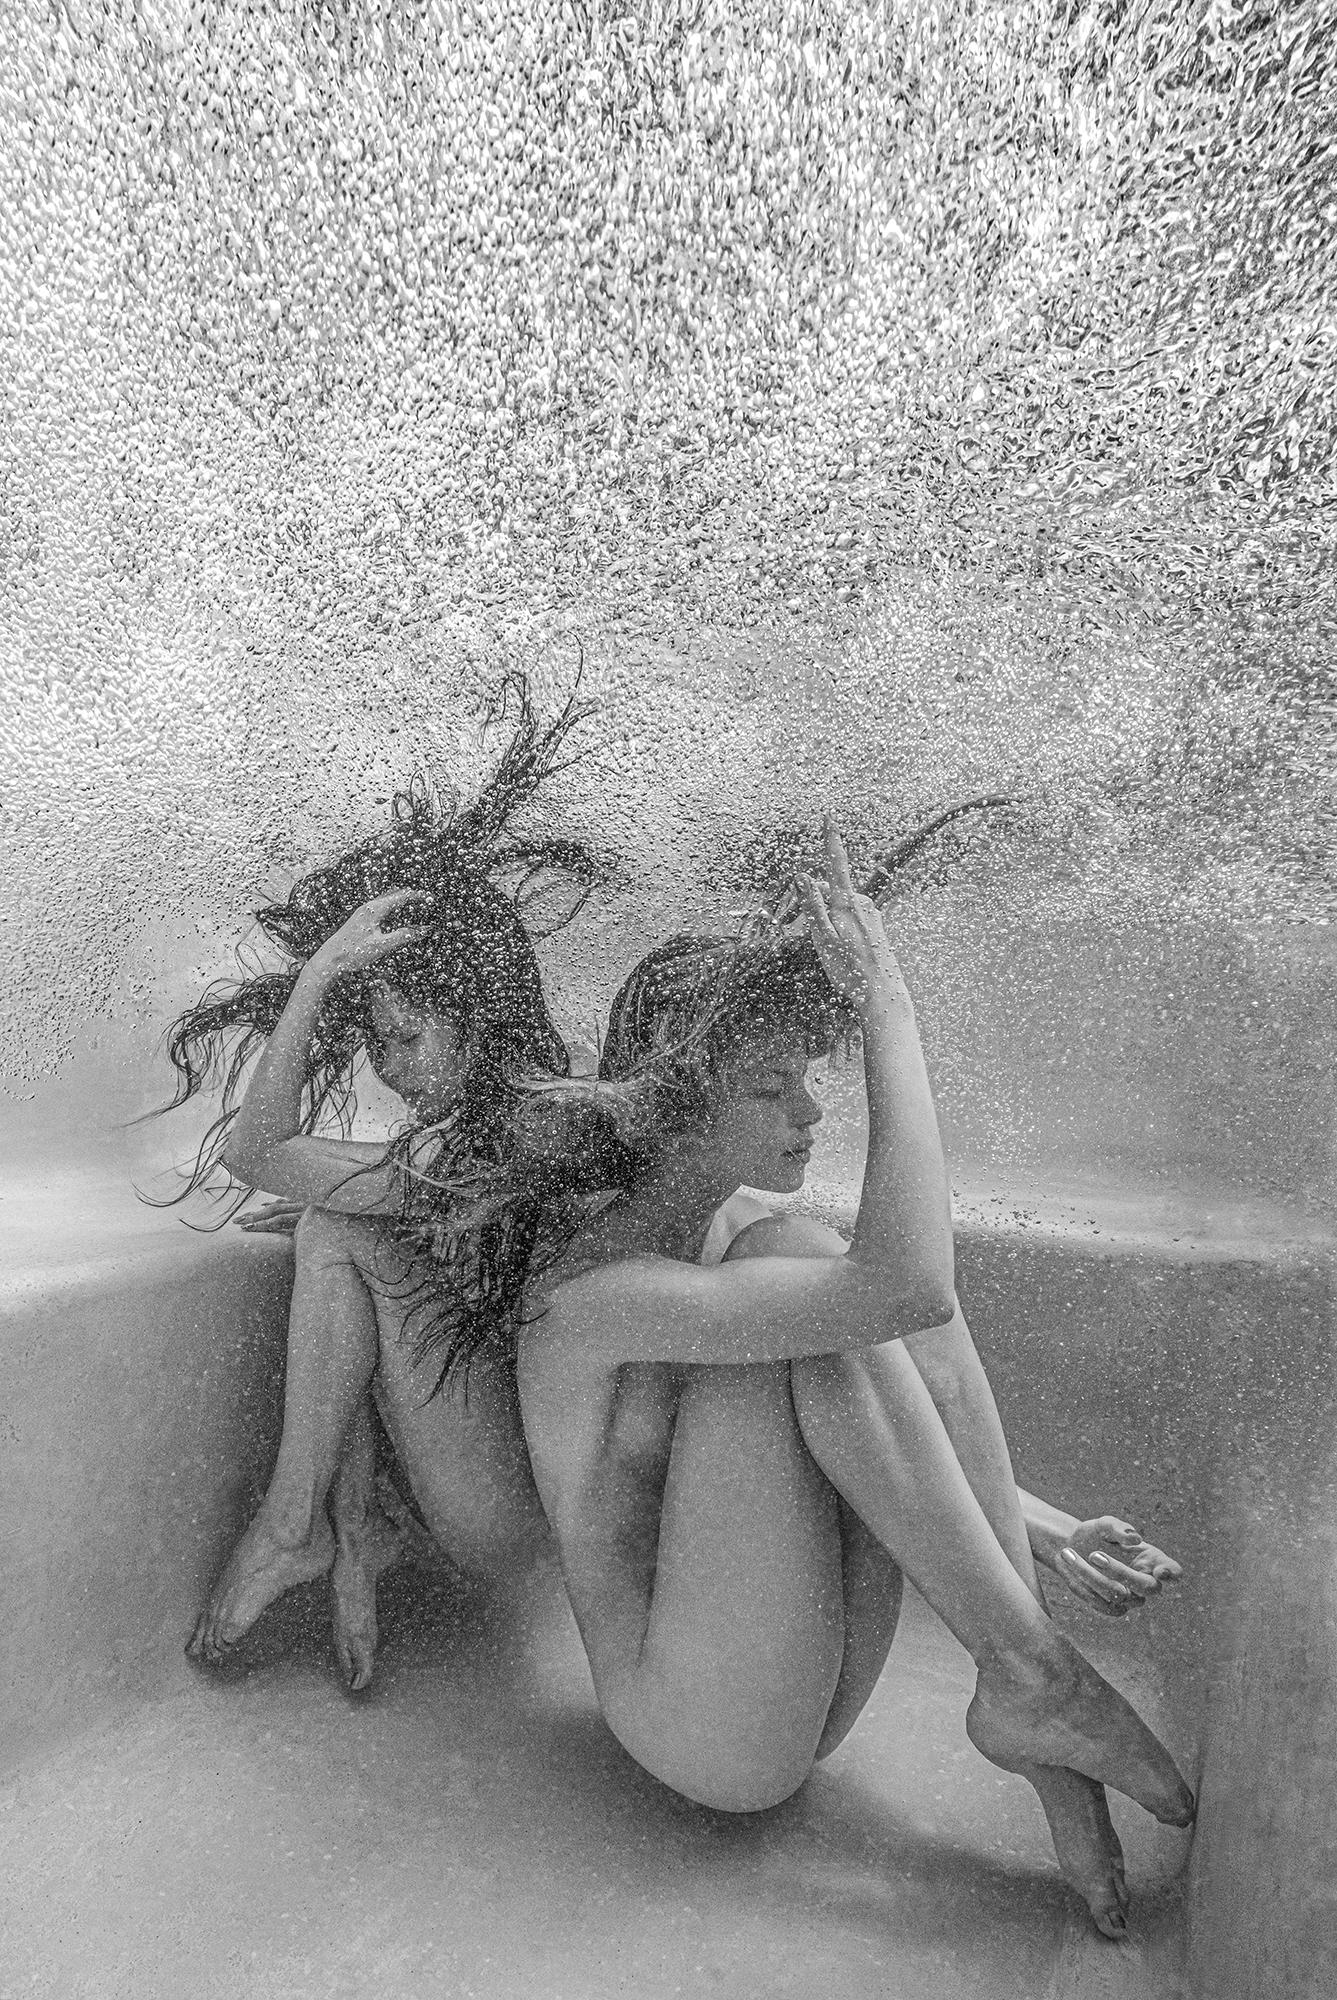 Alex Sher Black and White Photograph - Friday Night - underwater black & white nude photograph - archival pigment 52x35